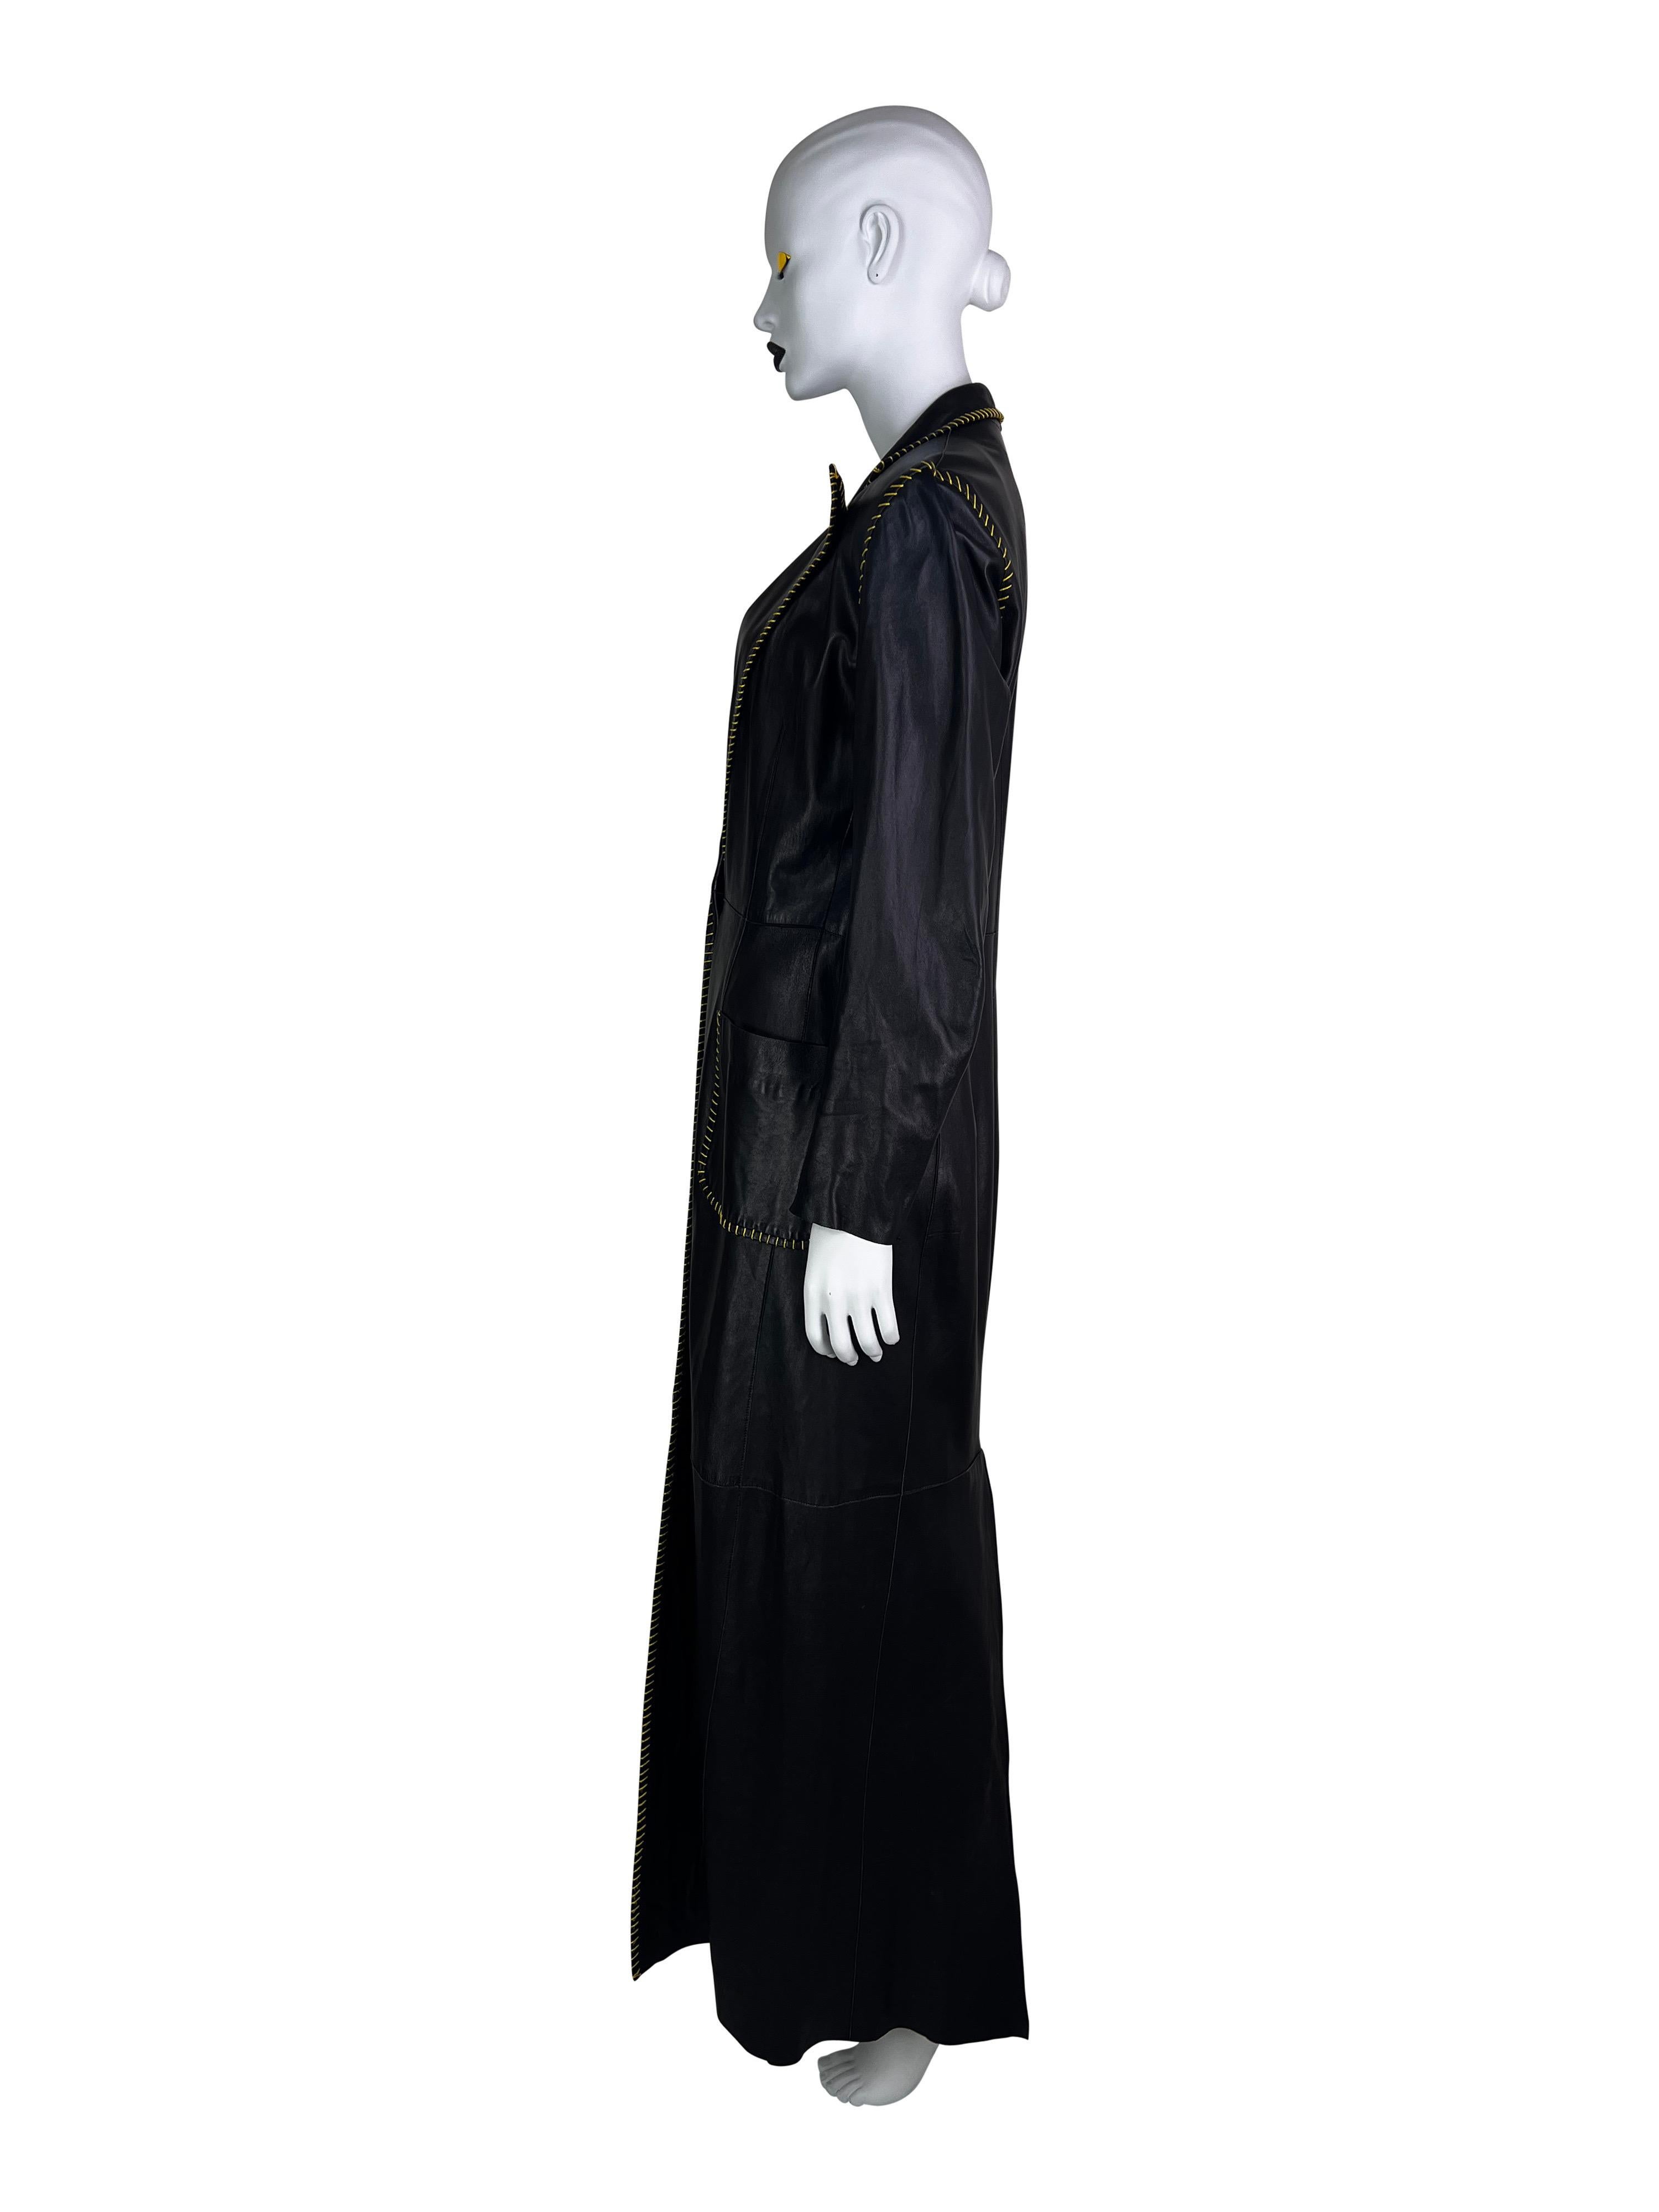 Alexander McQueen for Givenchy Spring 2000 Leather Coat For Sale 5